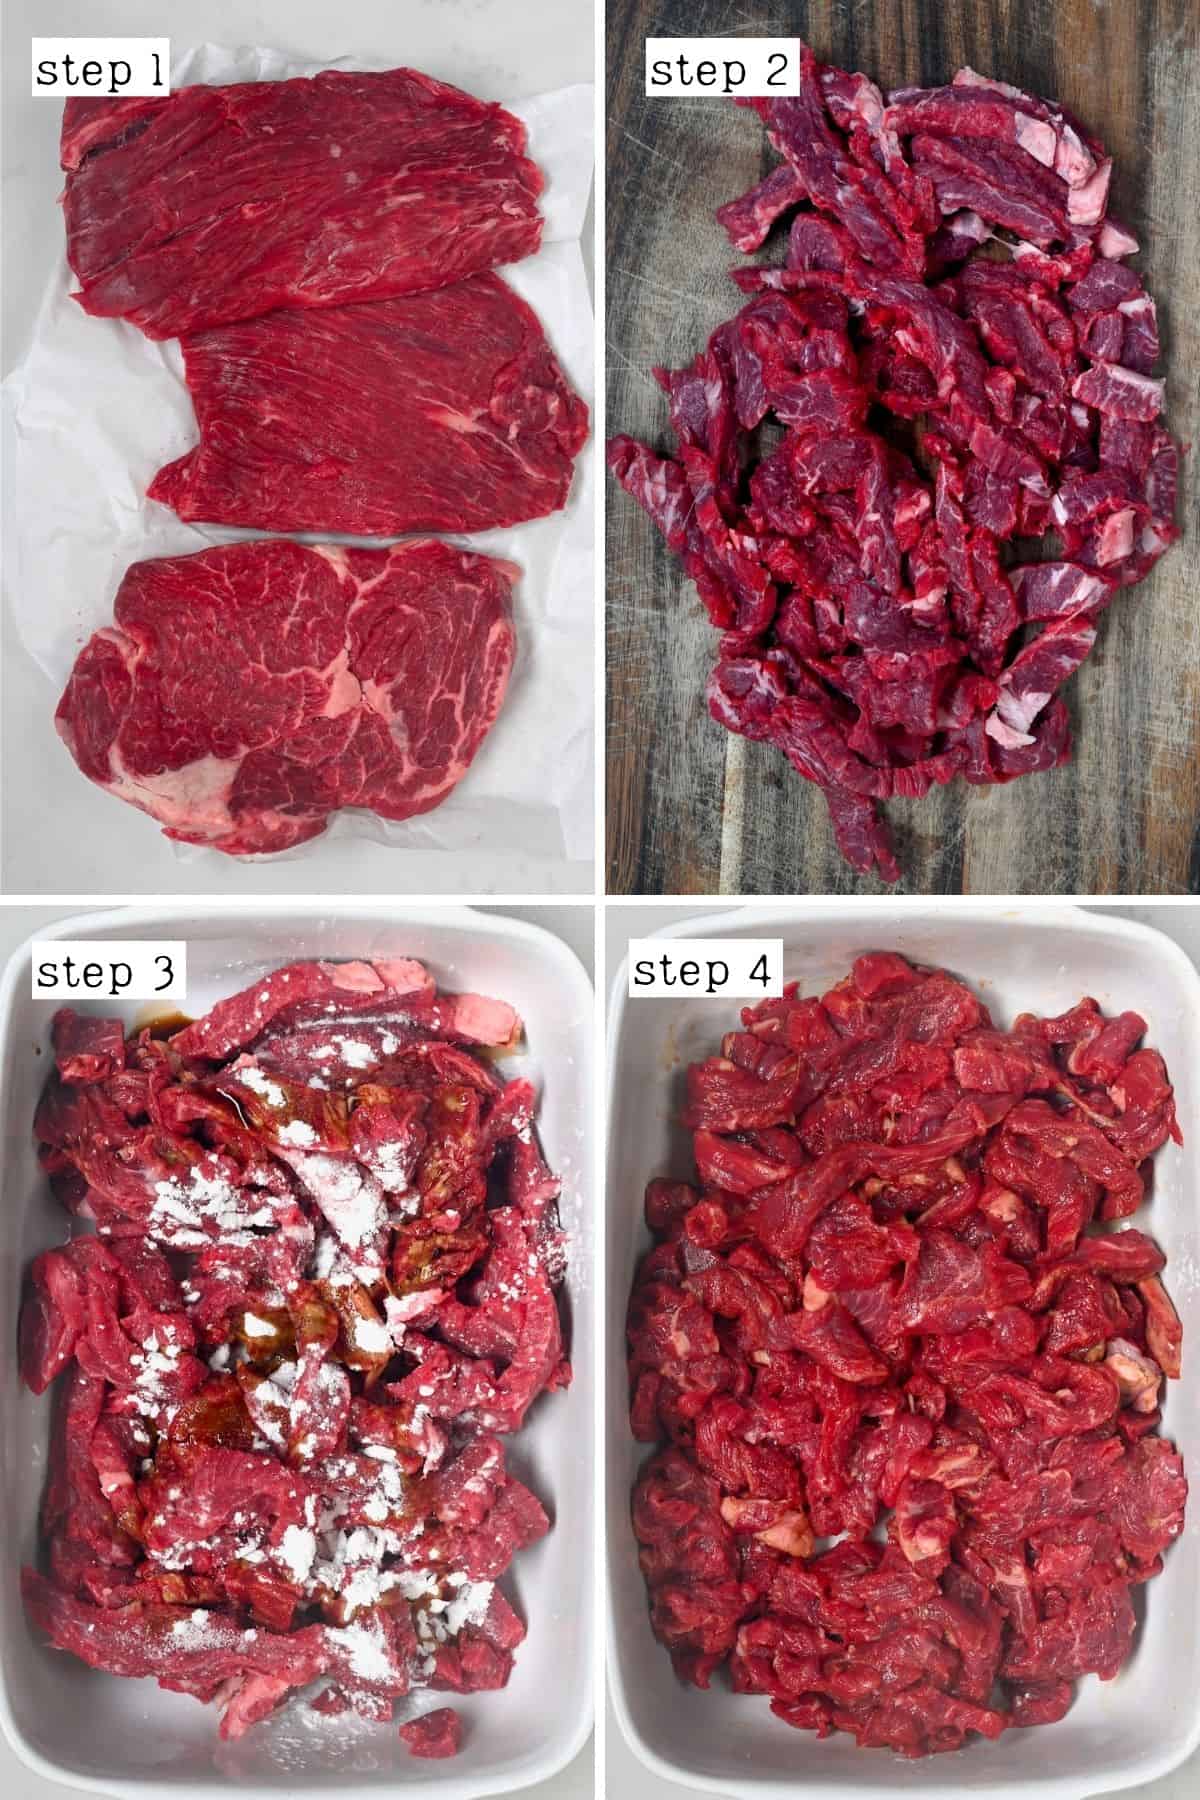 Steps for cutting and preparing steak